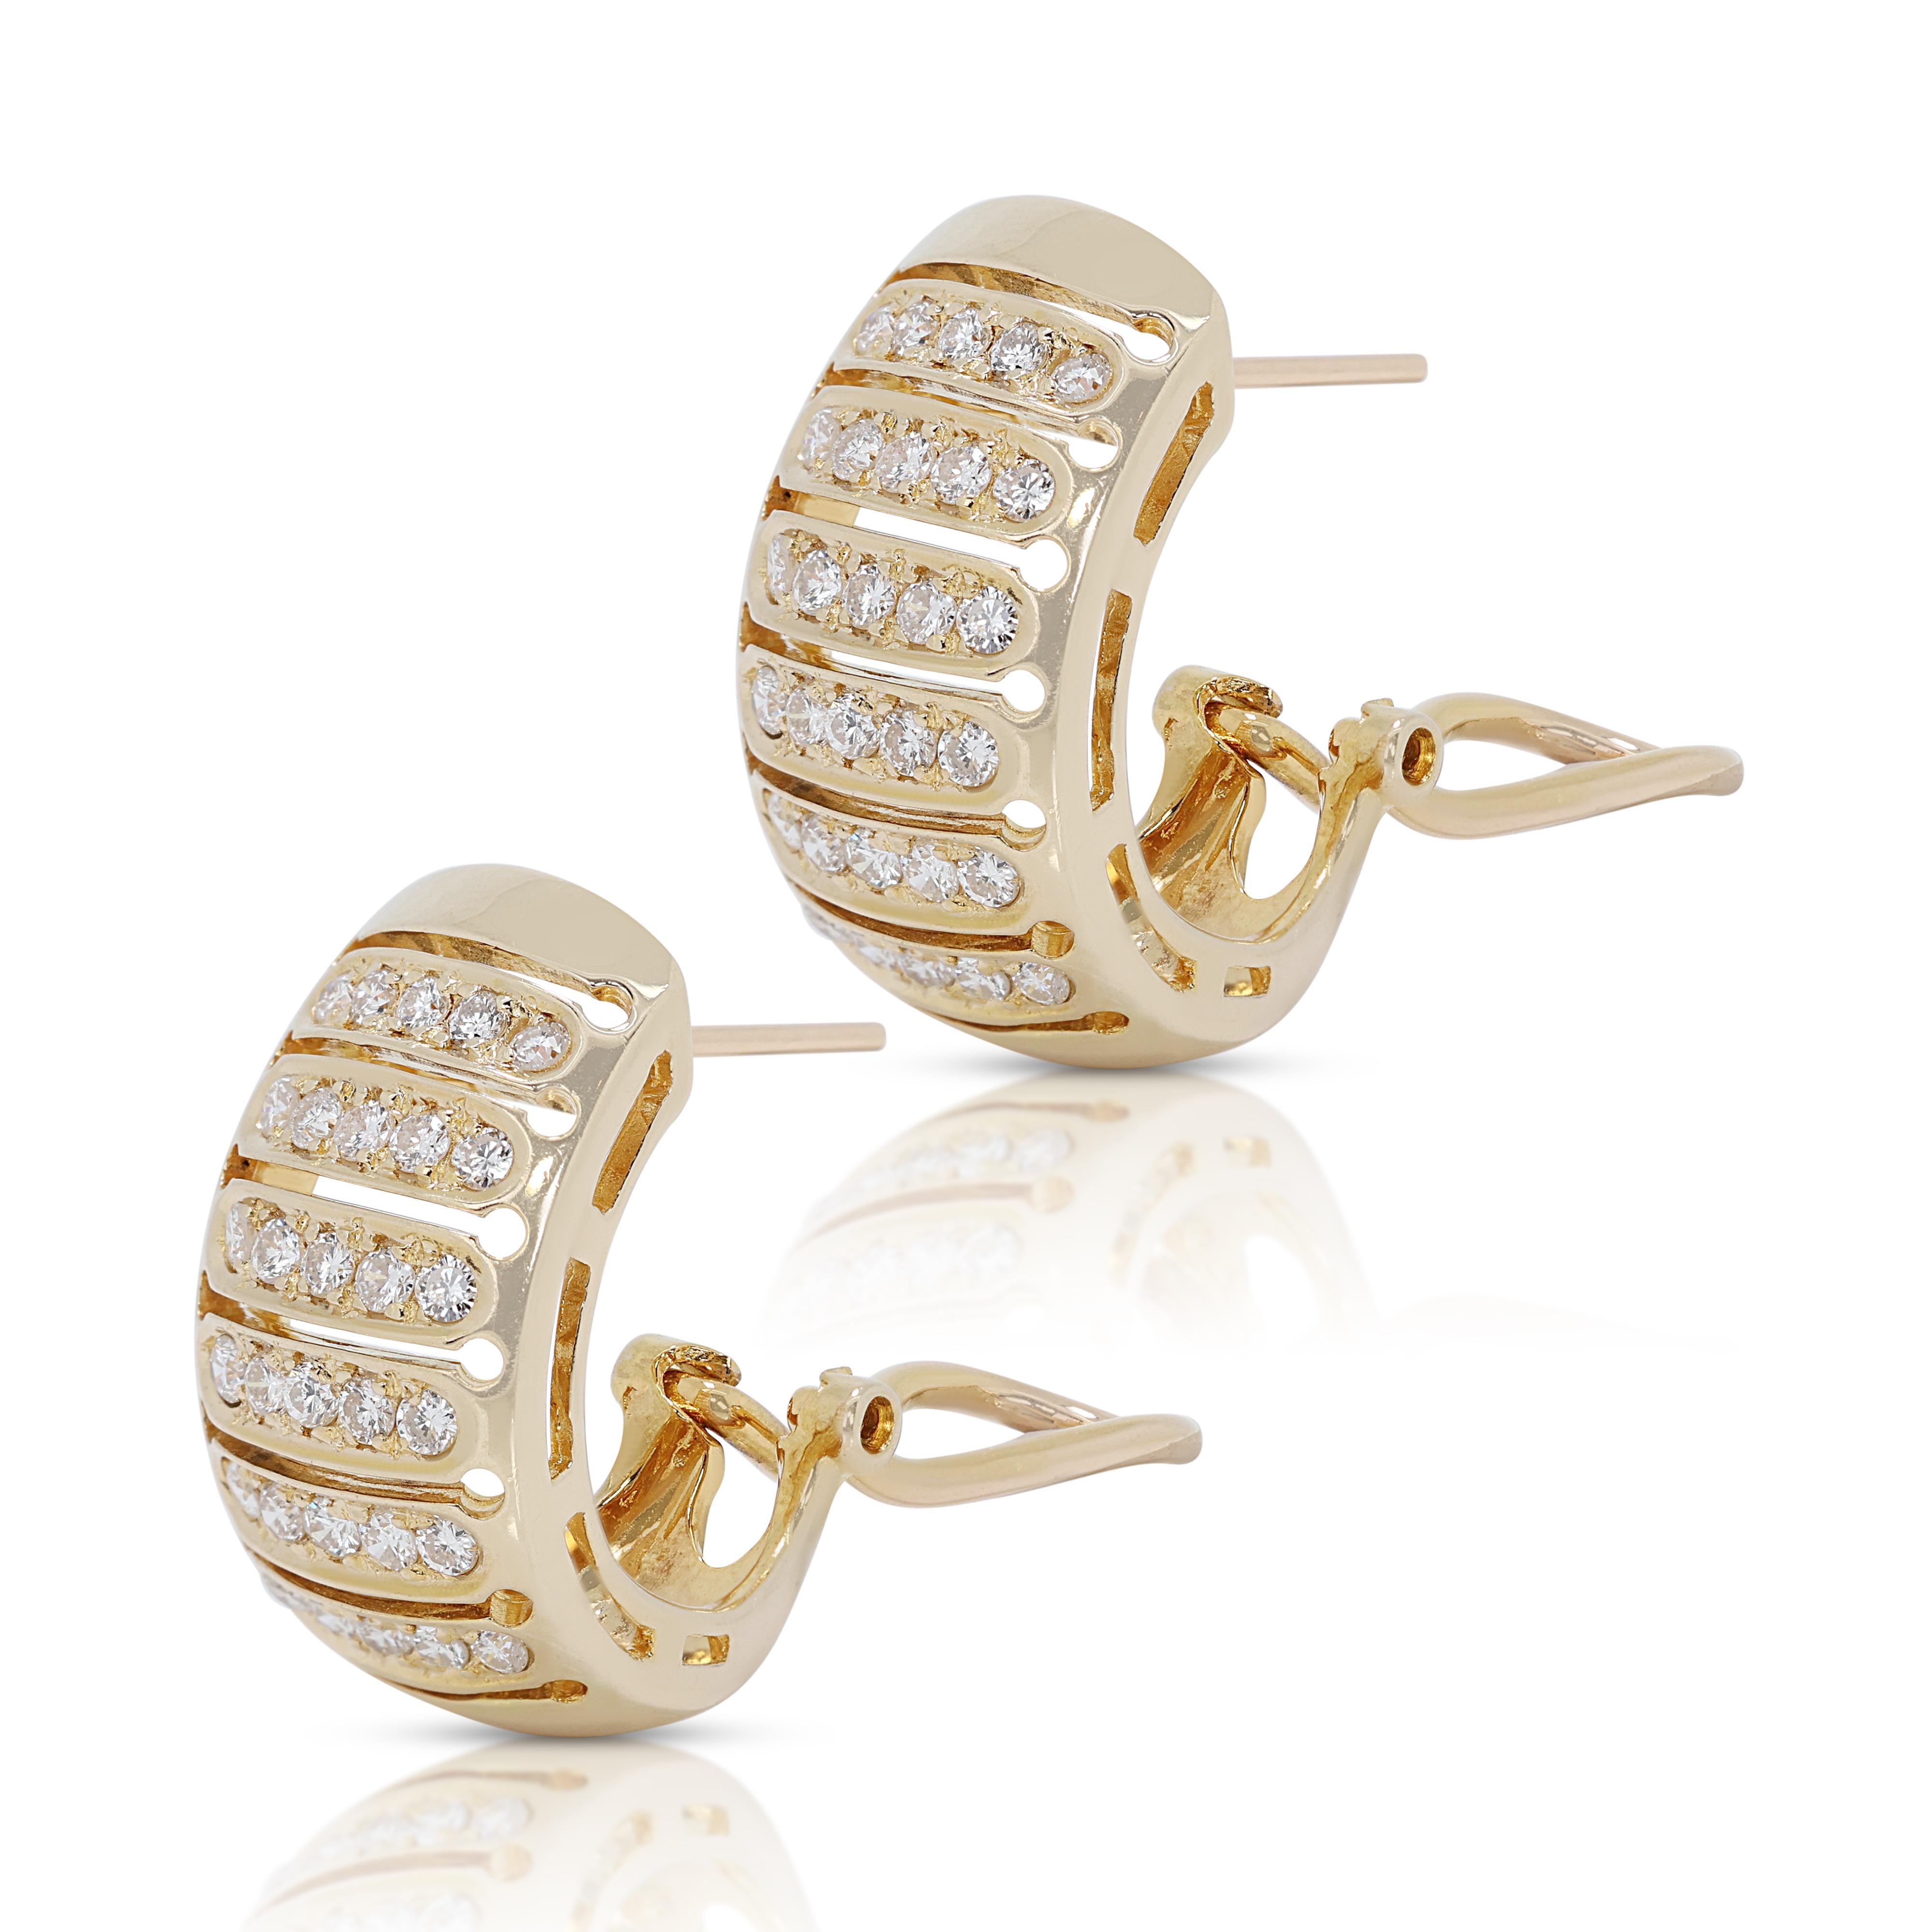 Timeless 0.42ct Diamond Earrings in 18k Yellow Gold In Excellent Condition For Sale In רמת גן, IL